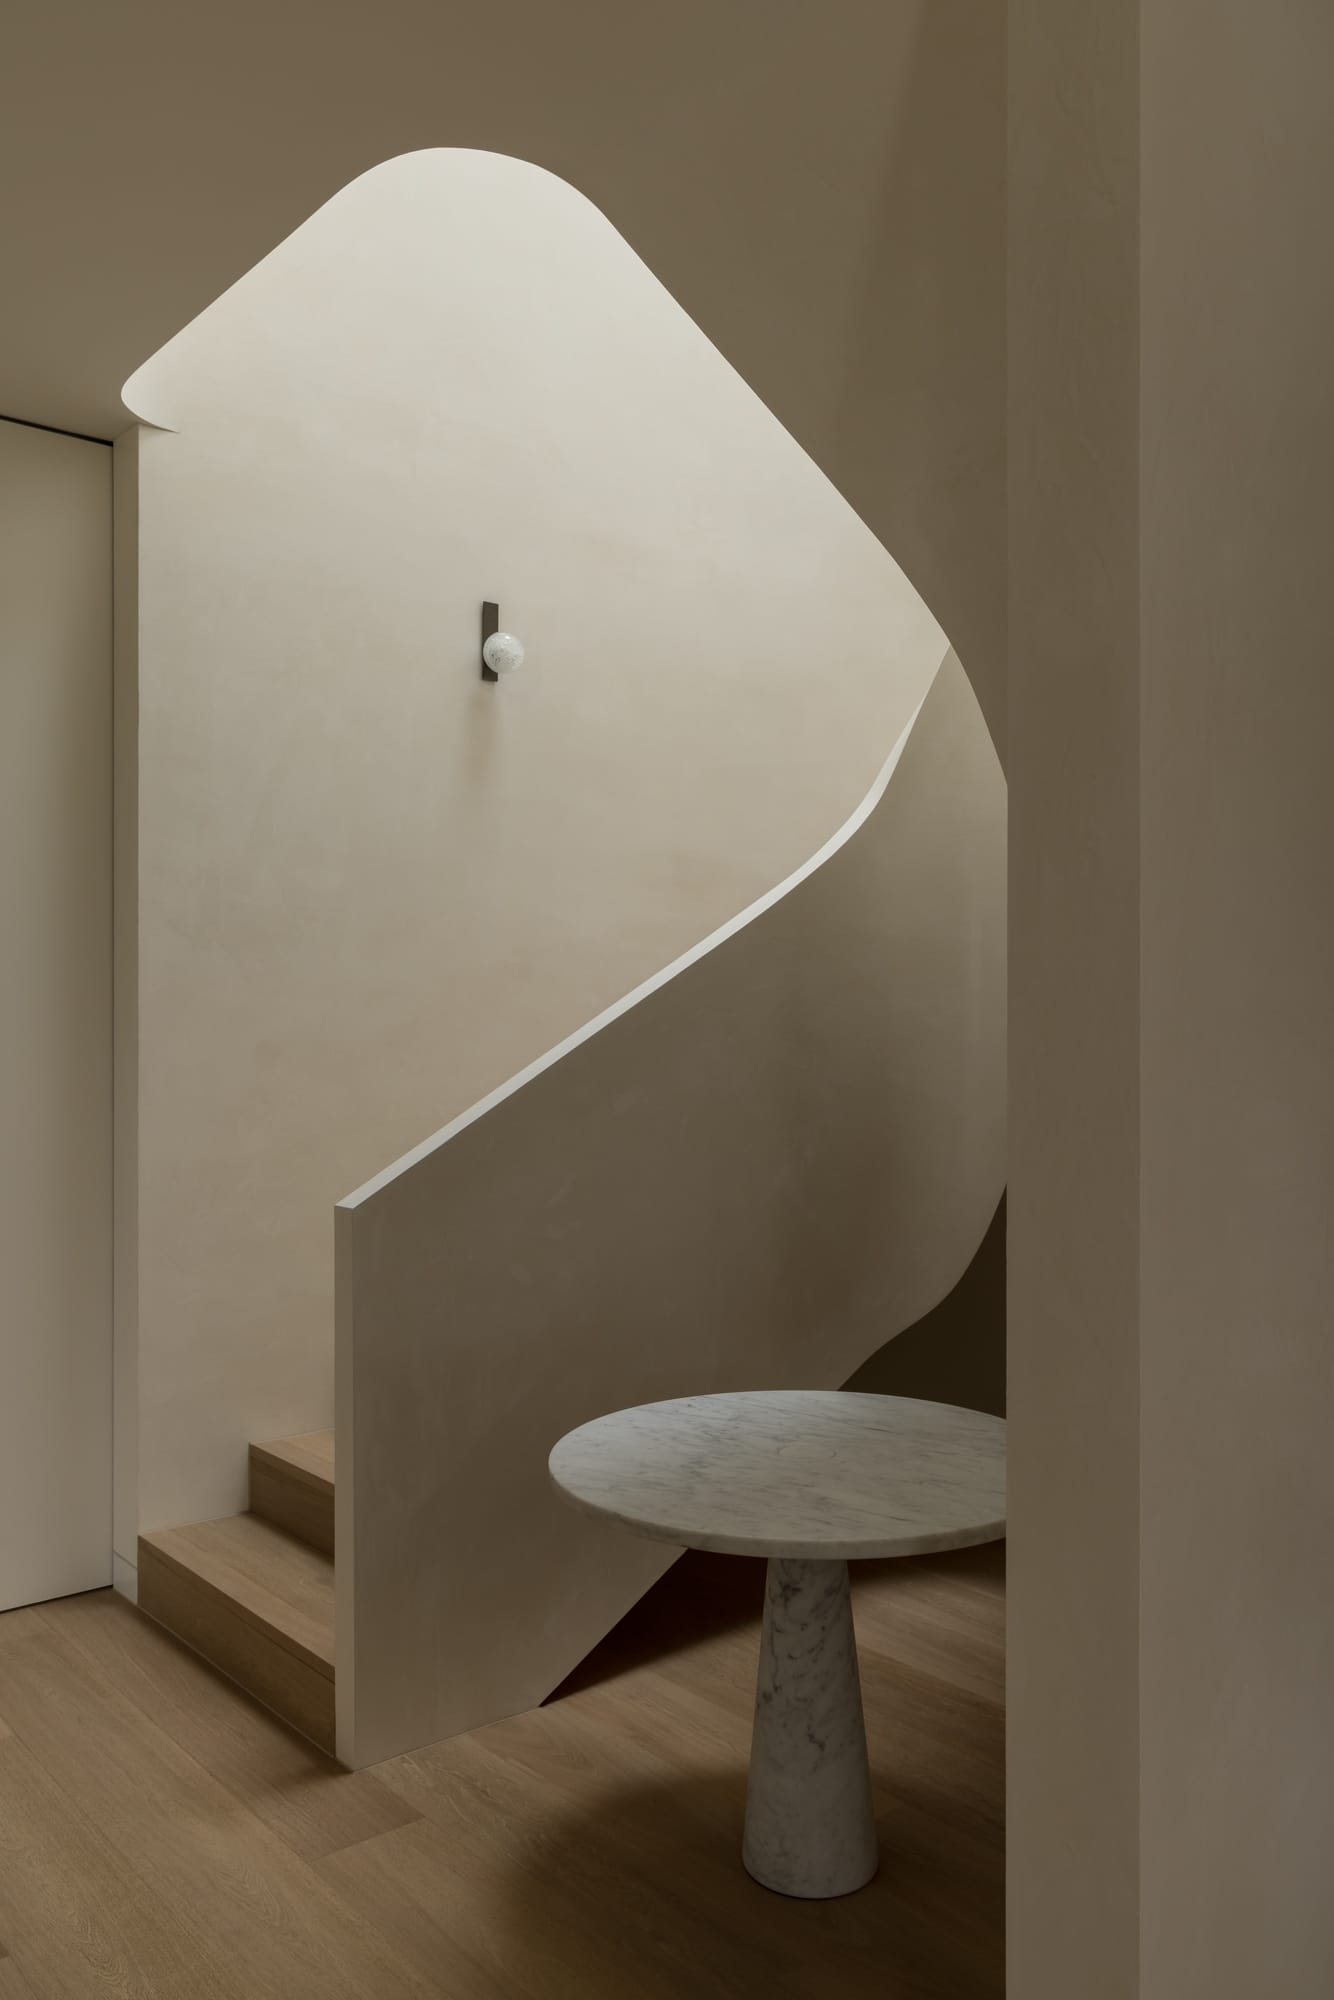 An interior shot of the staircase with a rendered handrail and timber floor as stair treads and a feature wall light